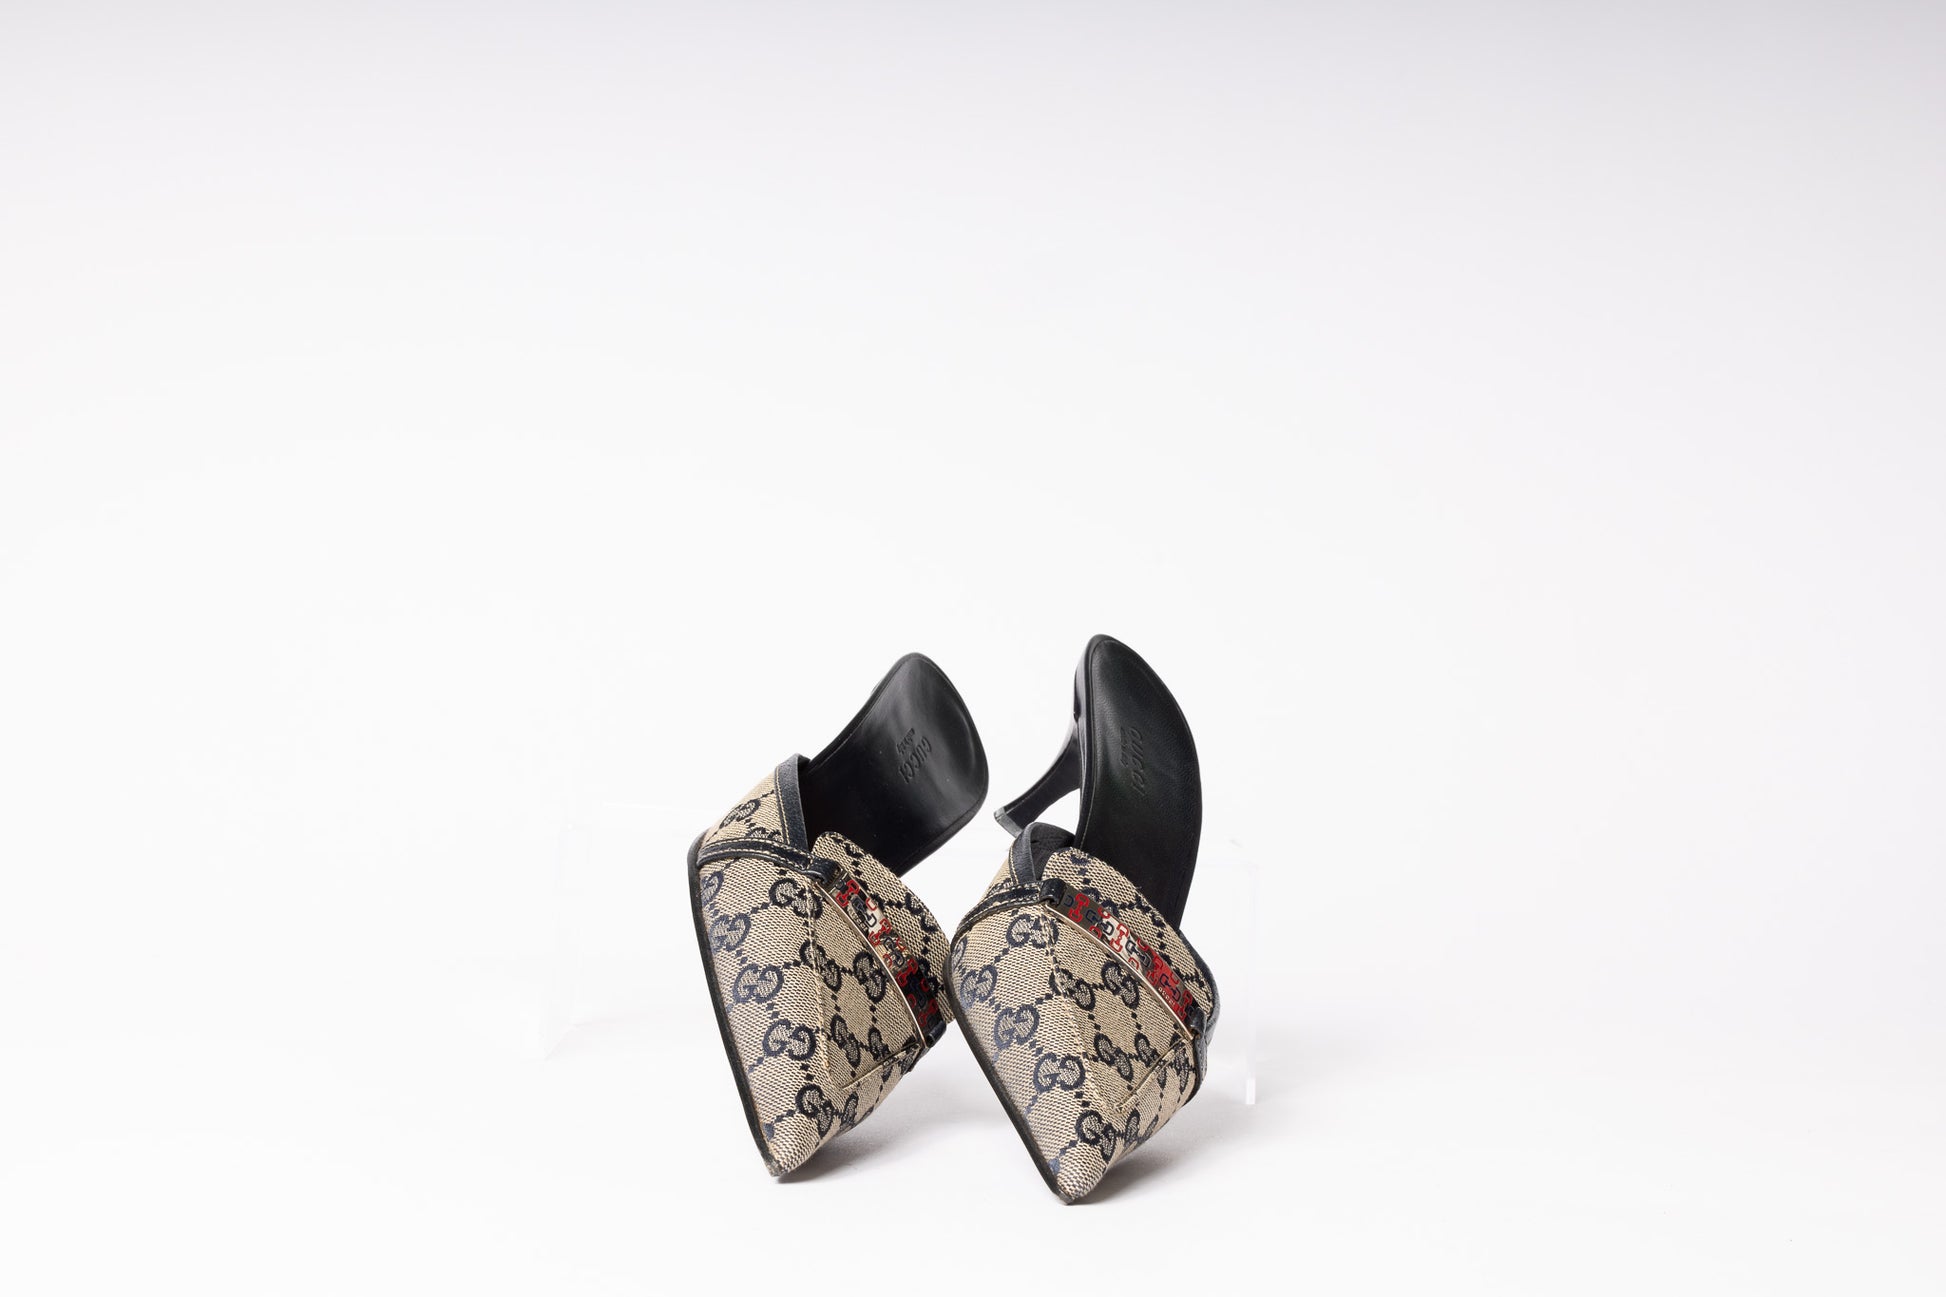 Vintage Gucci Mules - Classic elegance and iconic style in luxurious footwear for a timeless fashion statement.